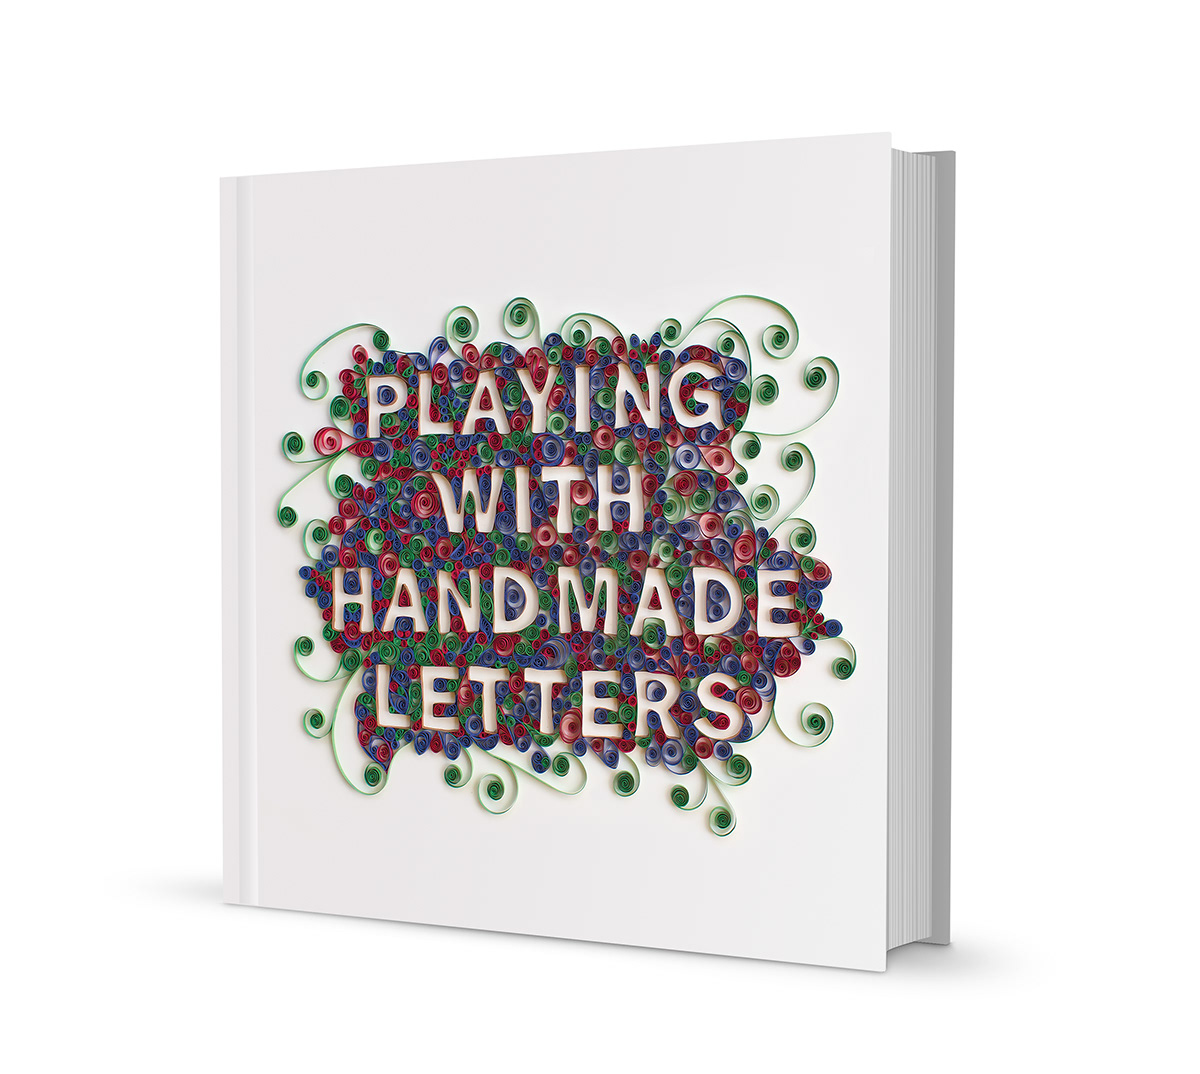 thesis publication  book handmade letters print